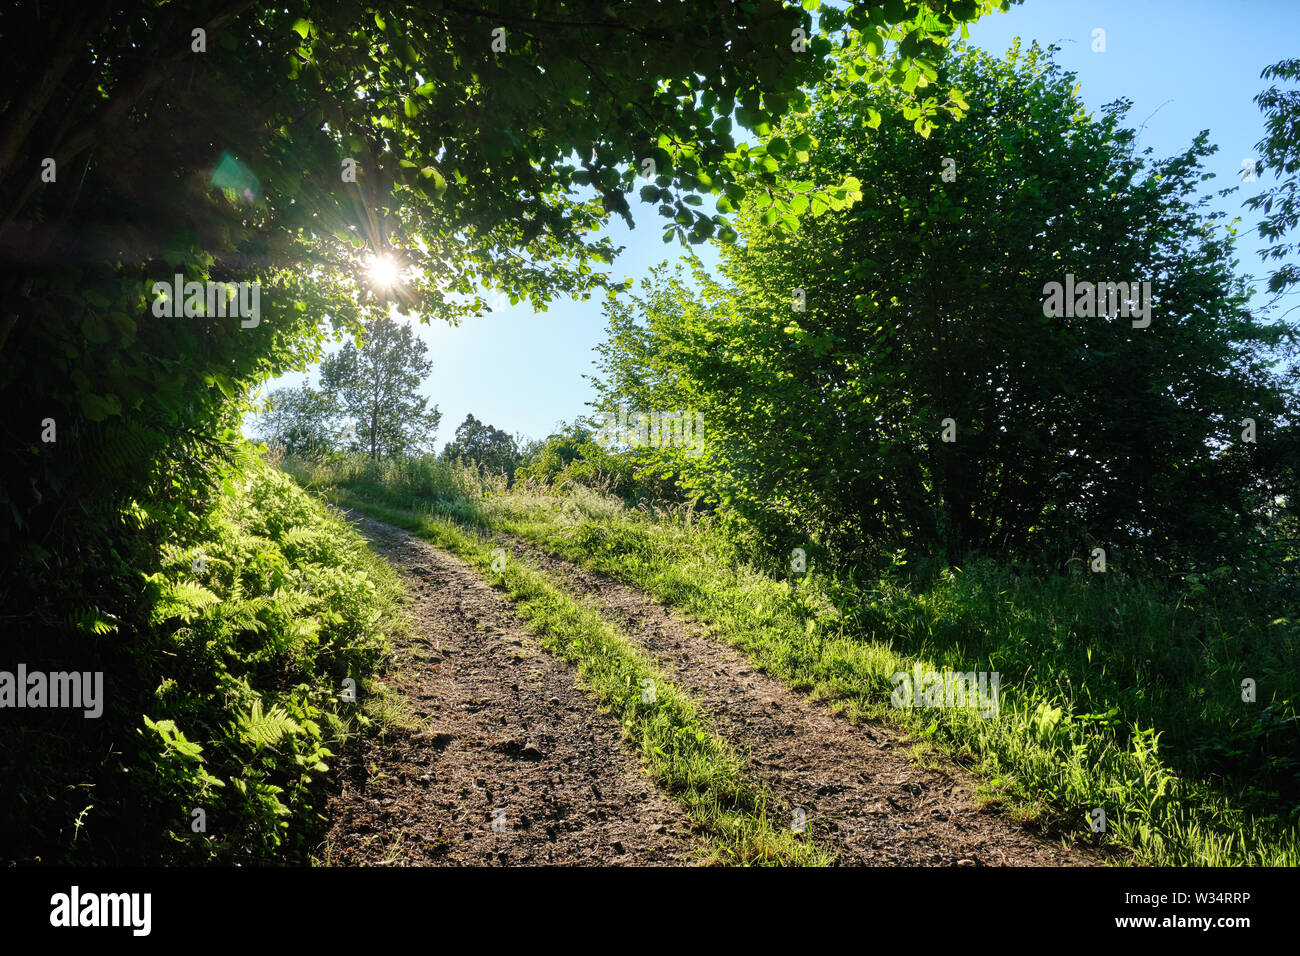 The way forward into the evening sun: Beautiful evening landscape shot with a diminishing gravel road surrounded by green nature Stock Photo